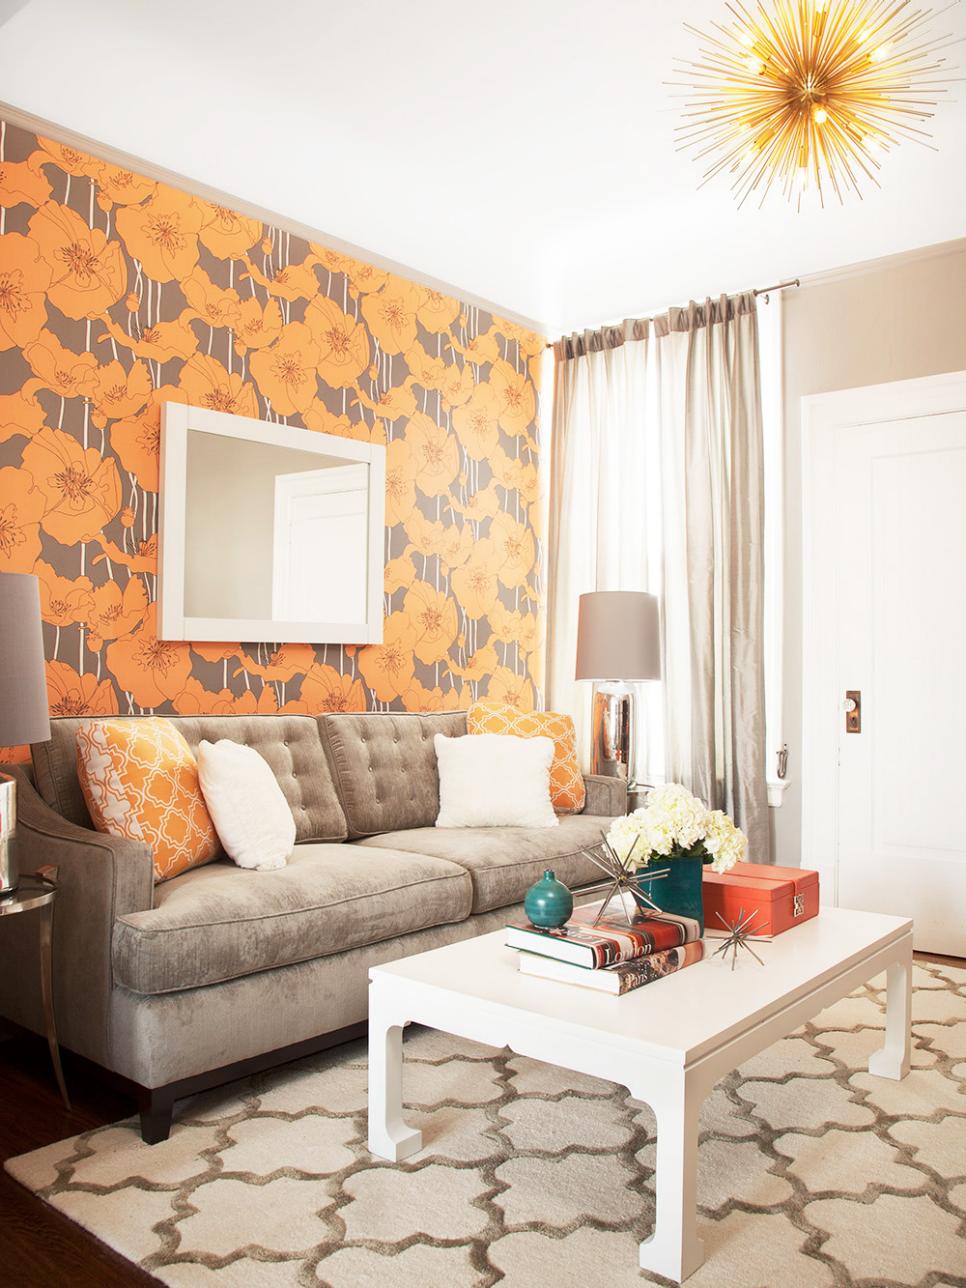 Eclectic Living Room With Neutral Sofa and Bold Floral Wallpaper | HGTV